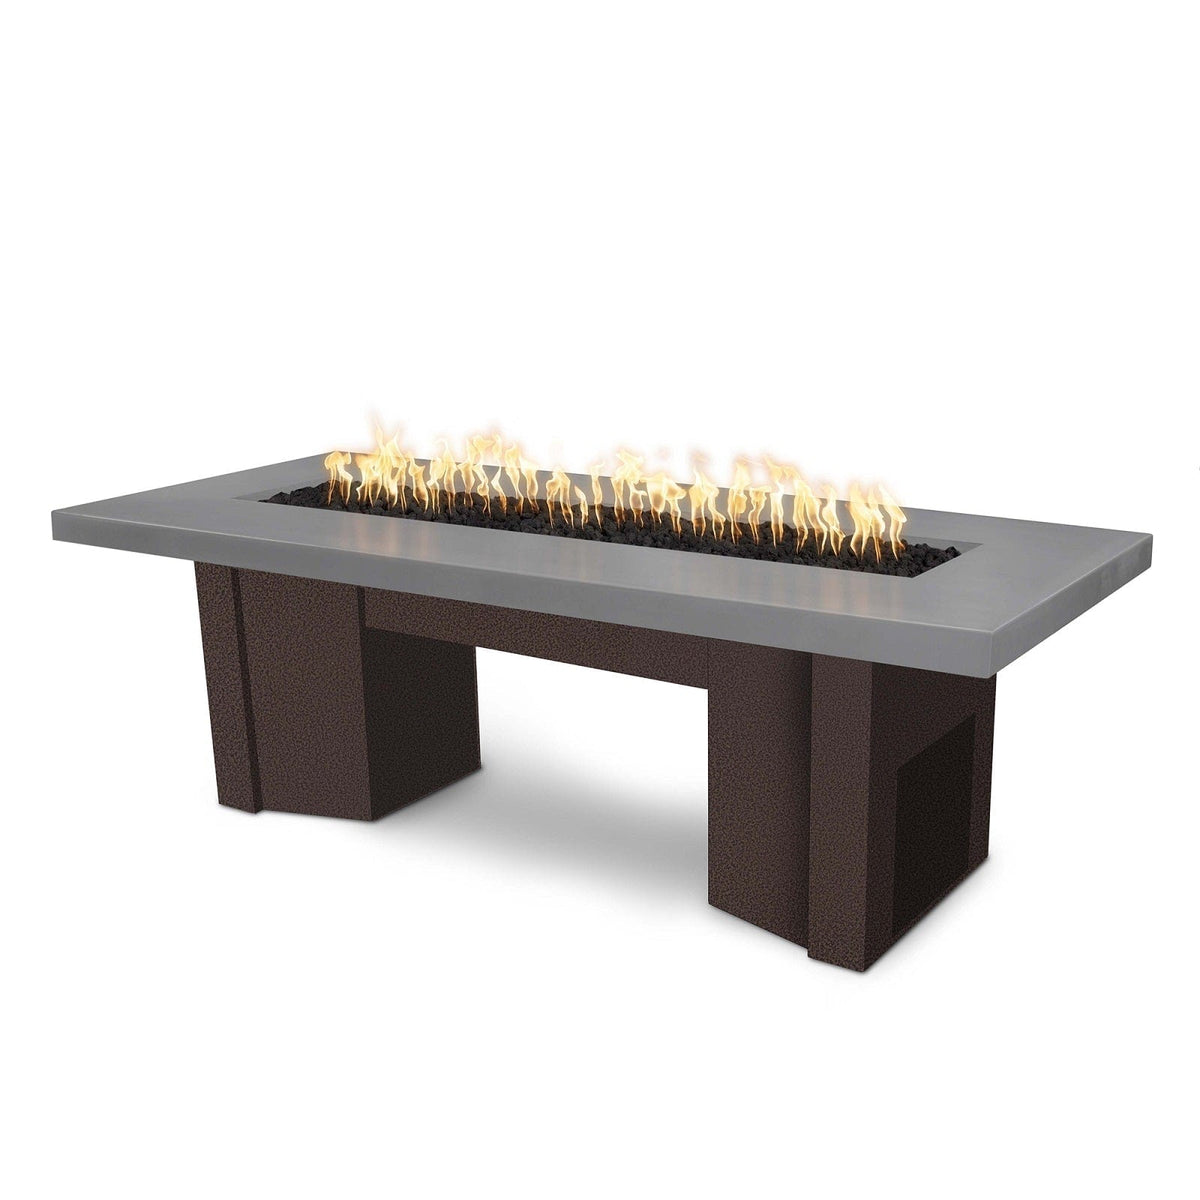 The Outdoor Plus Fire Features Natural Gray (-NGY) / Copper Vein Powder Coated Steel (-CPV) The Outdoor Plus 60&quot; Alameda Fire Table Smooth Concrete in Liquid Propane - 12V Electronic Ignition / OPT-ALMGFRC60E12V-LP